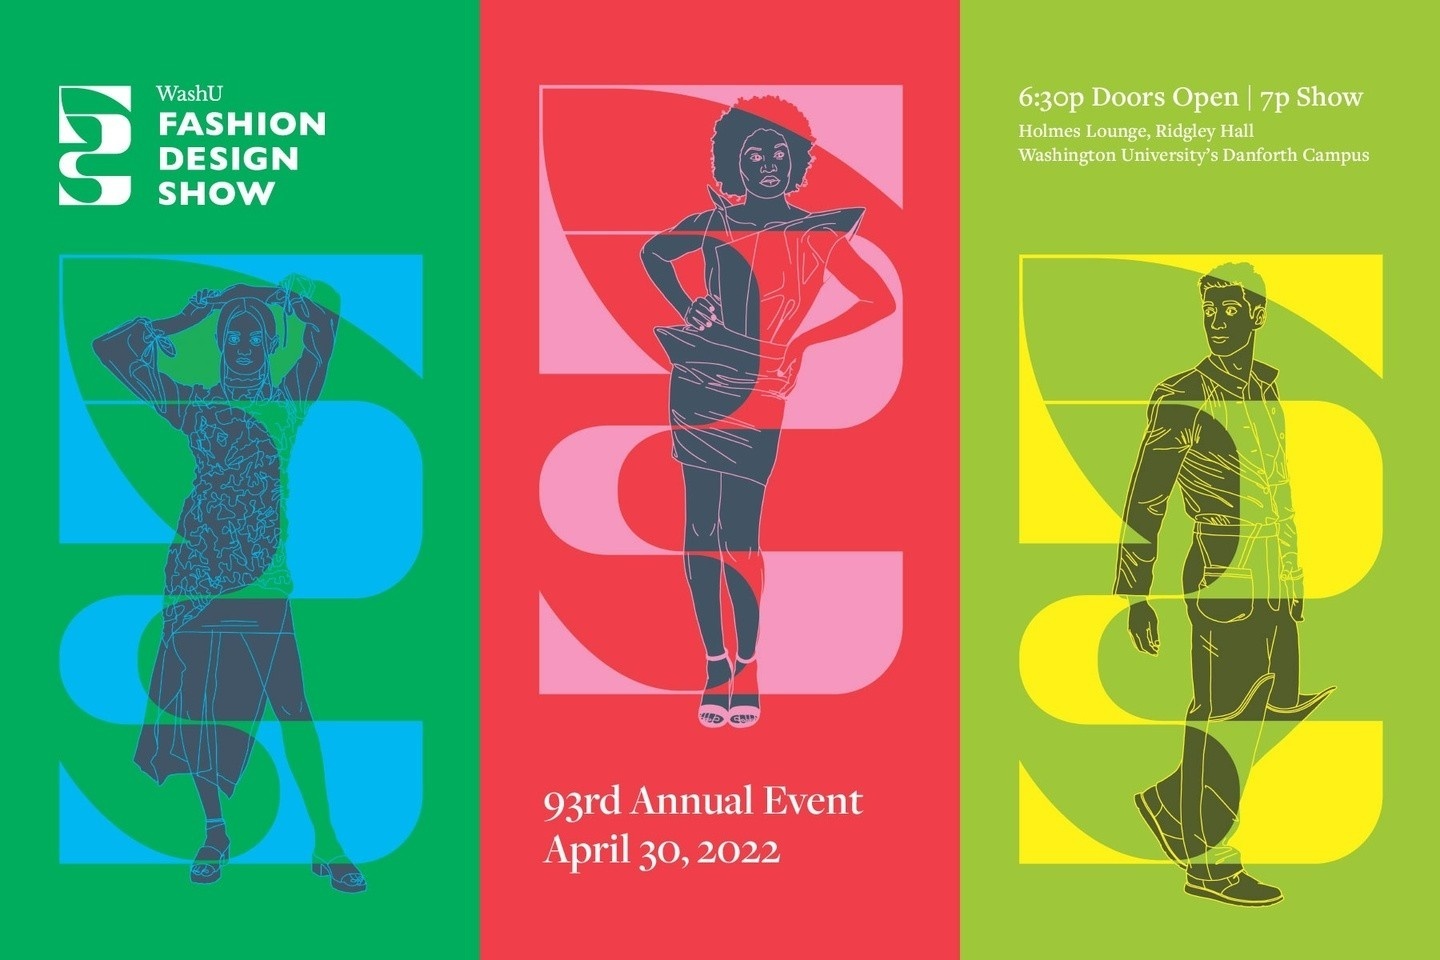 WashU Fashion Design Show, 93rd Annual, April 30, 2022. Three brightly colored fashion design line drawings showing a ruched dress, an short angular dress, and a men's look with tall pant cuffs.